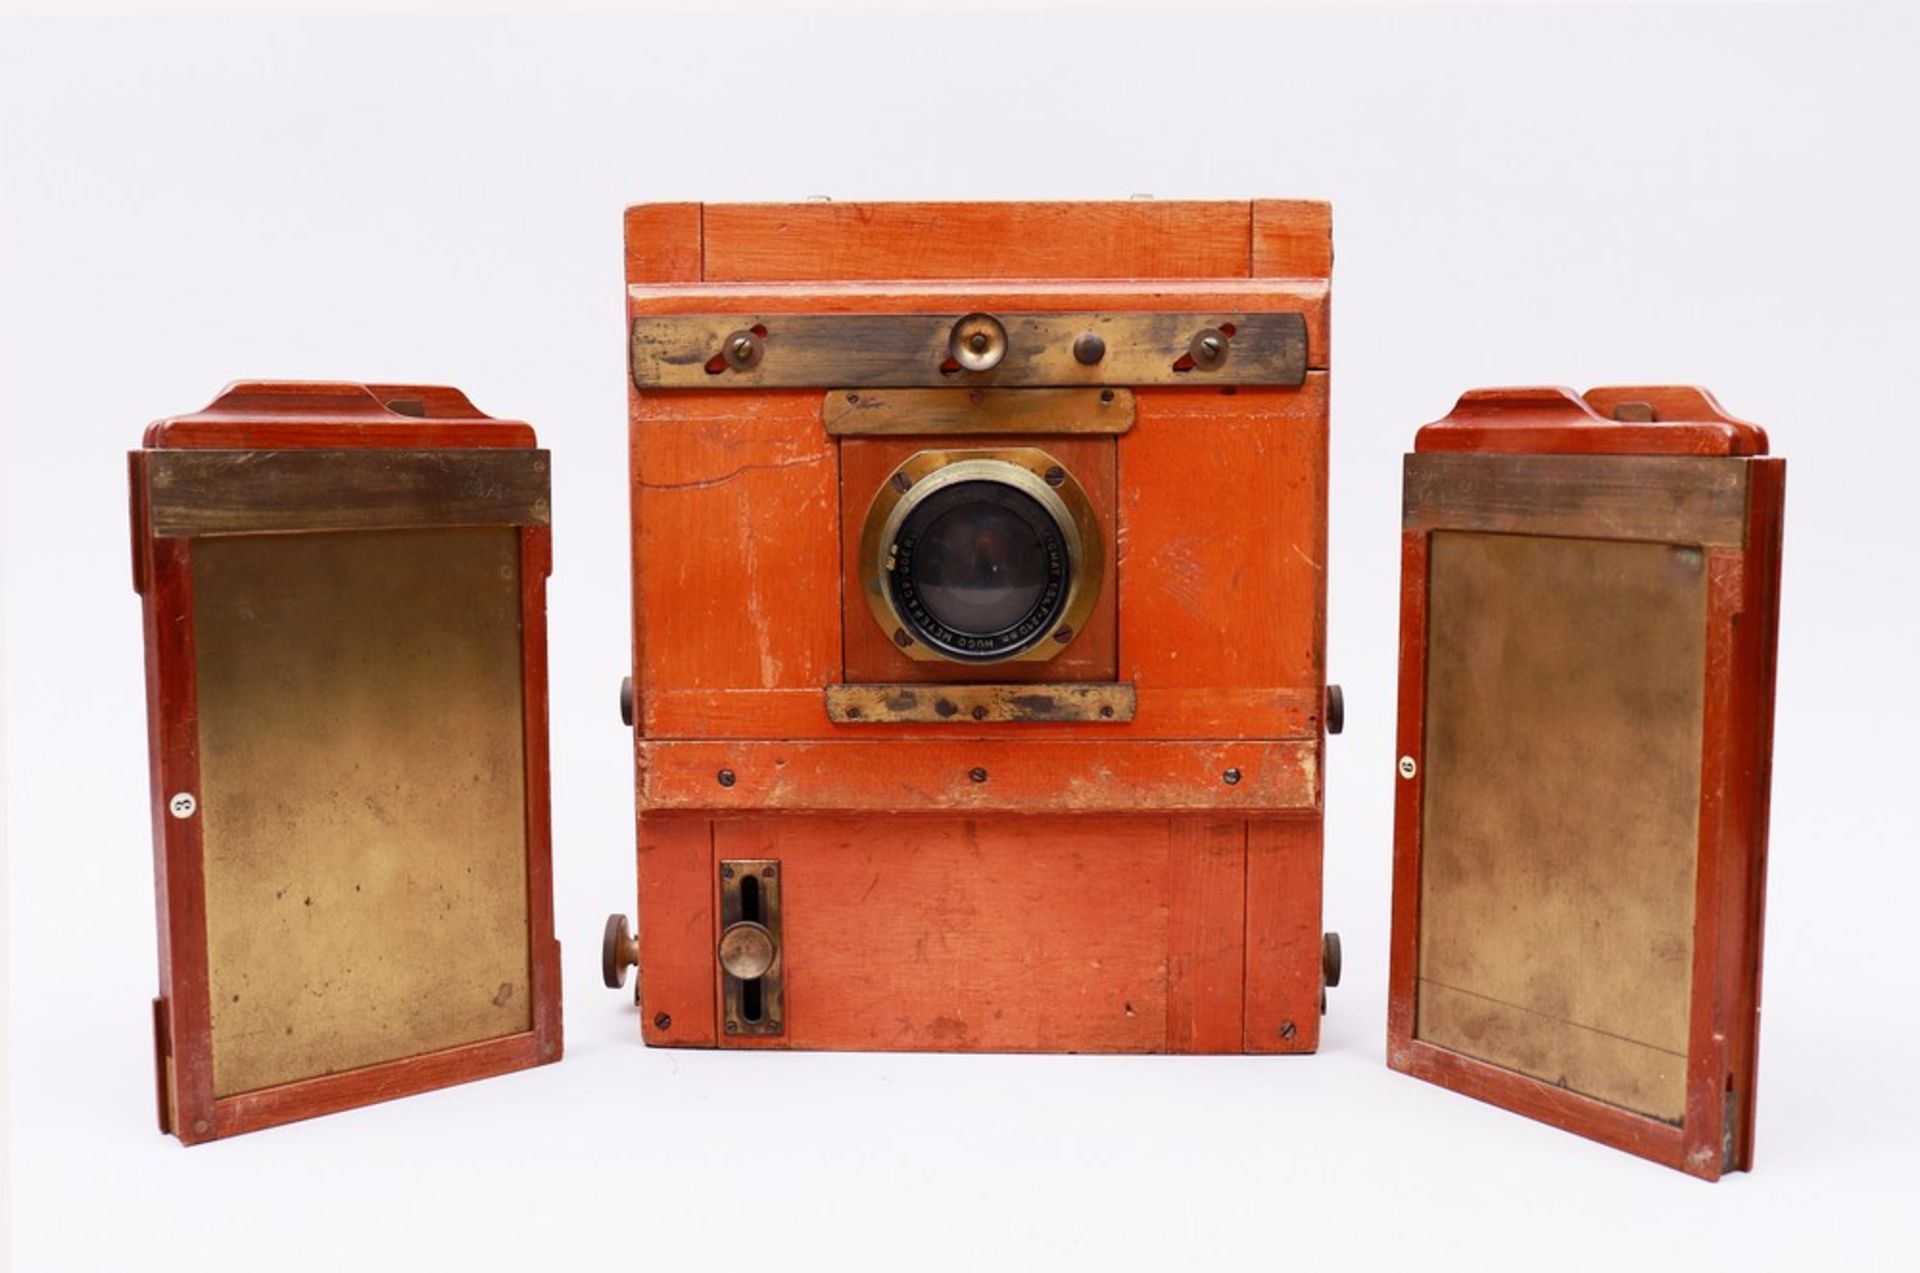 Plate camera with 2 plate holders, probably German, early 20th C.